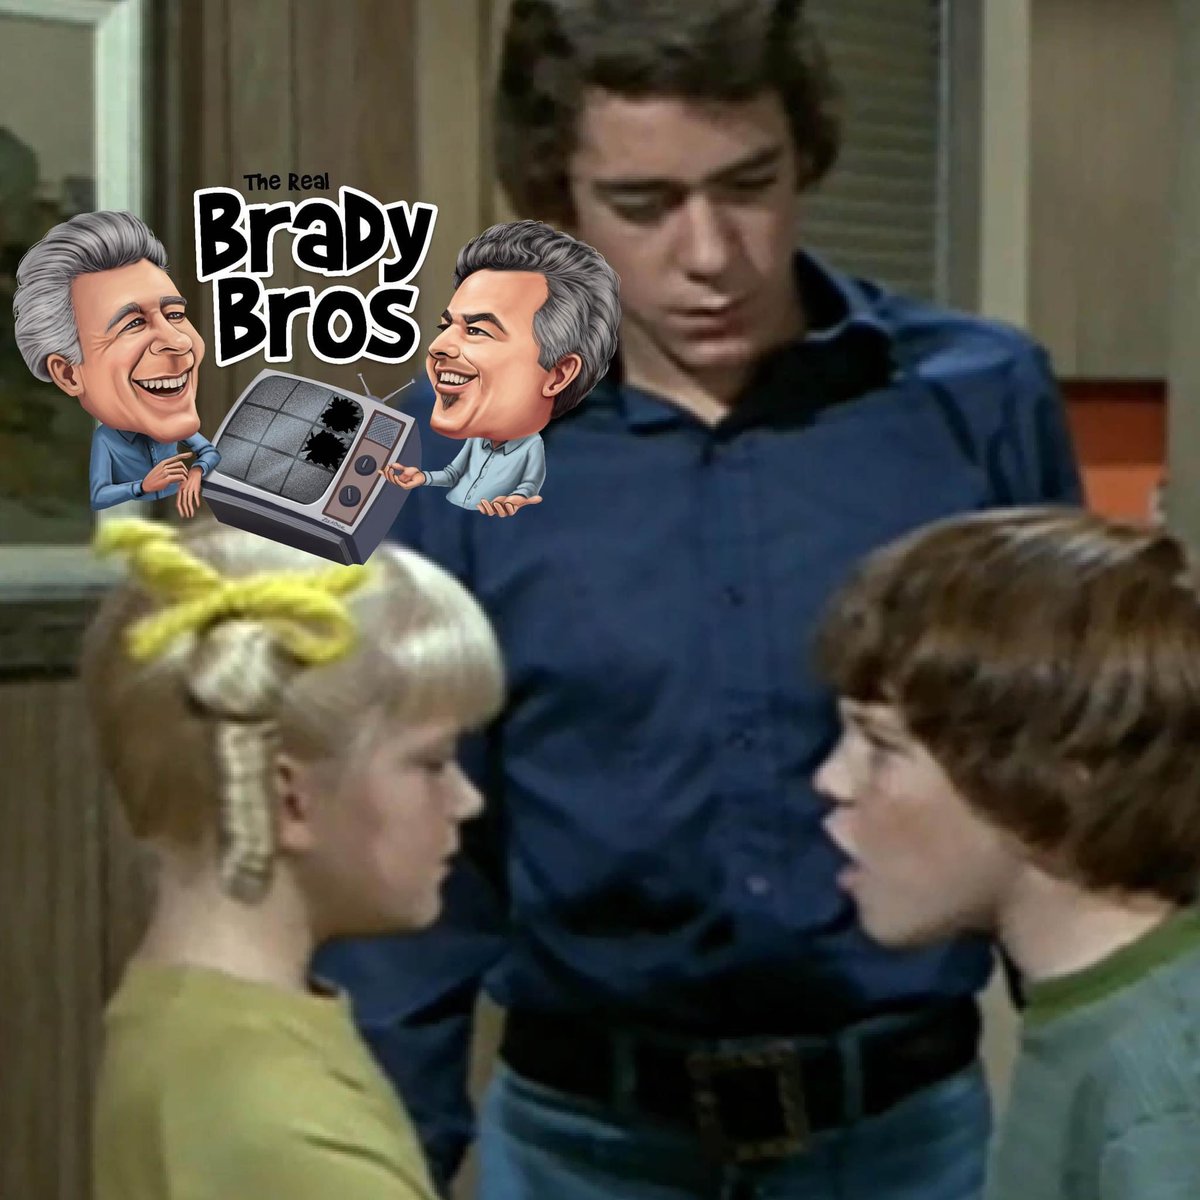 Listen to 'The Private Ear, Part 1' here apple.co/3IF7y4X. ⁠ Follow the podcast on Facebook @The Real Brady Bros⁠ ⁠ #PeterBrady #porkchopsandapplesauce #thebradybunch #realbradybros #therealbradybros #GregBrady #BarryWilliams